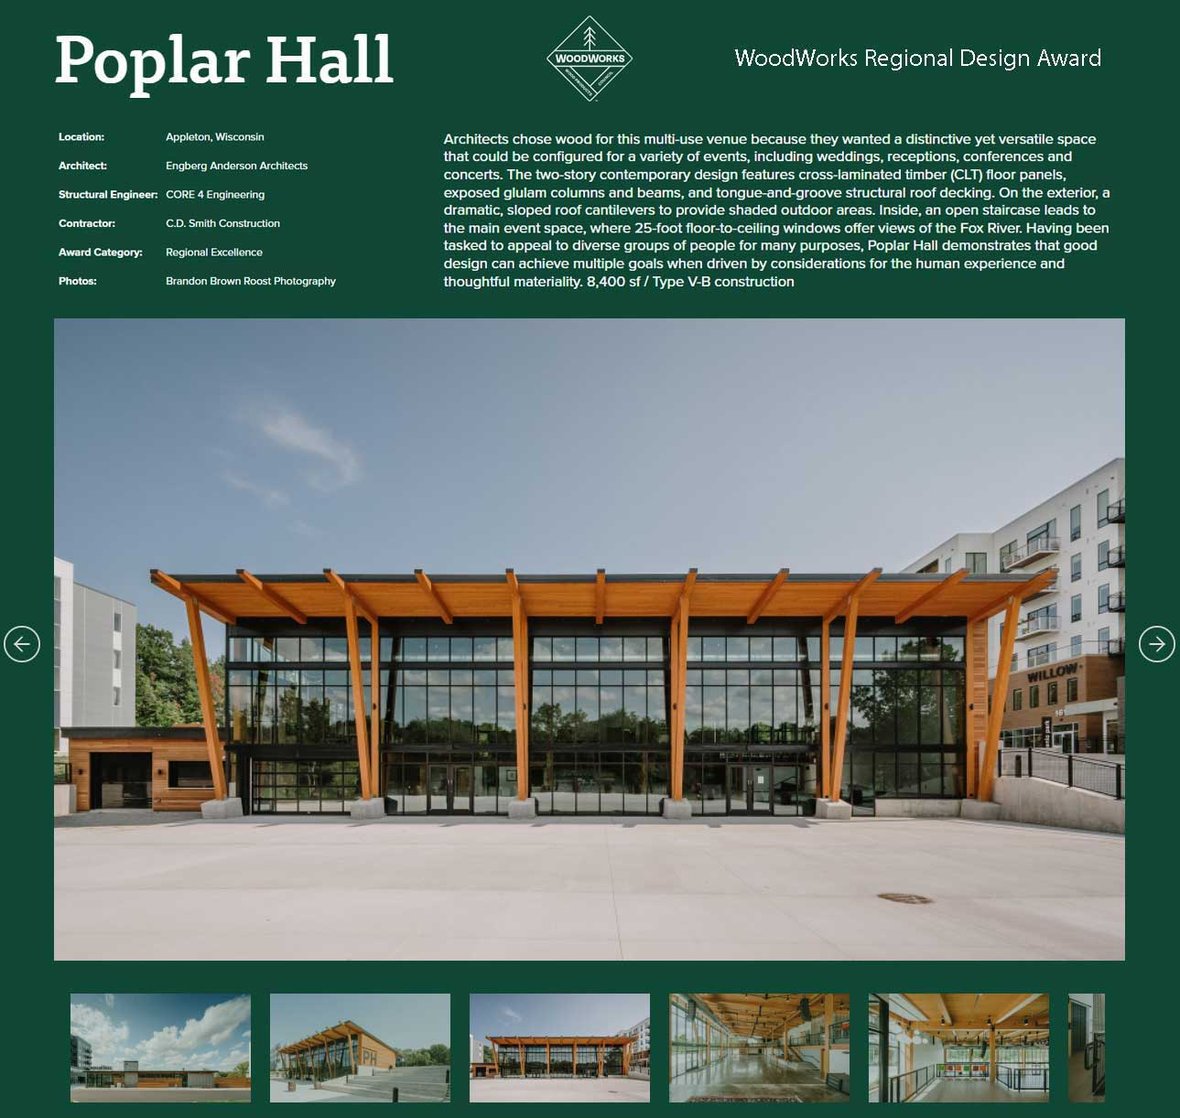 RiverHeath Poplar Hall Event Space Screenshot in WoodWorks' Award Gallery of mass timber building